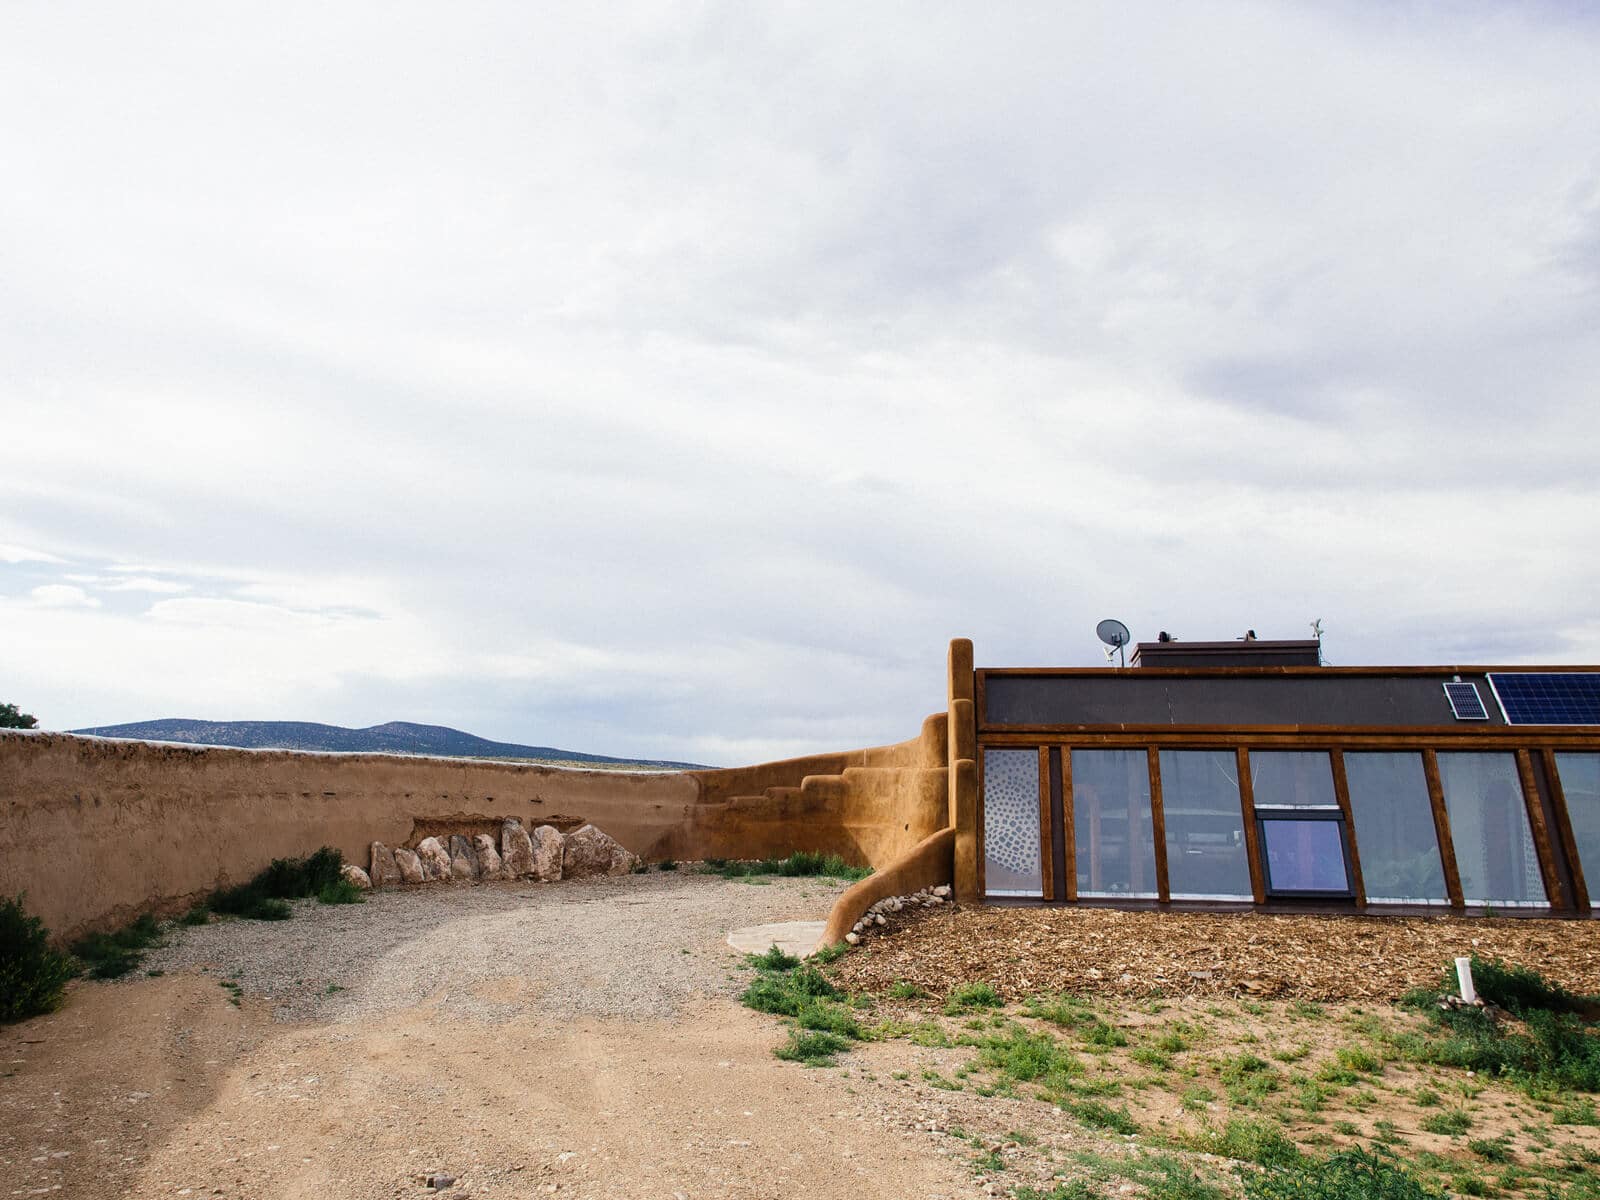 Driveway leading to the garage on an Earthship property